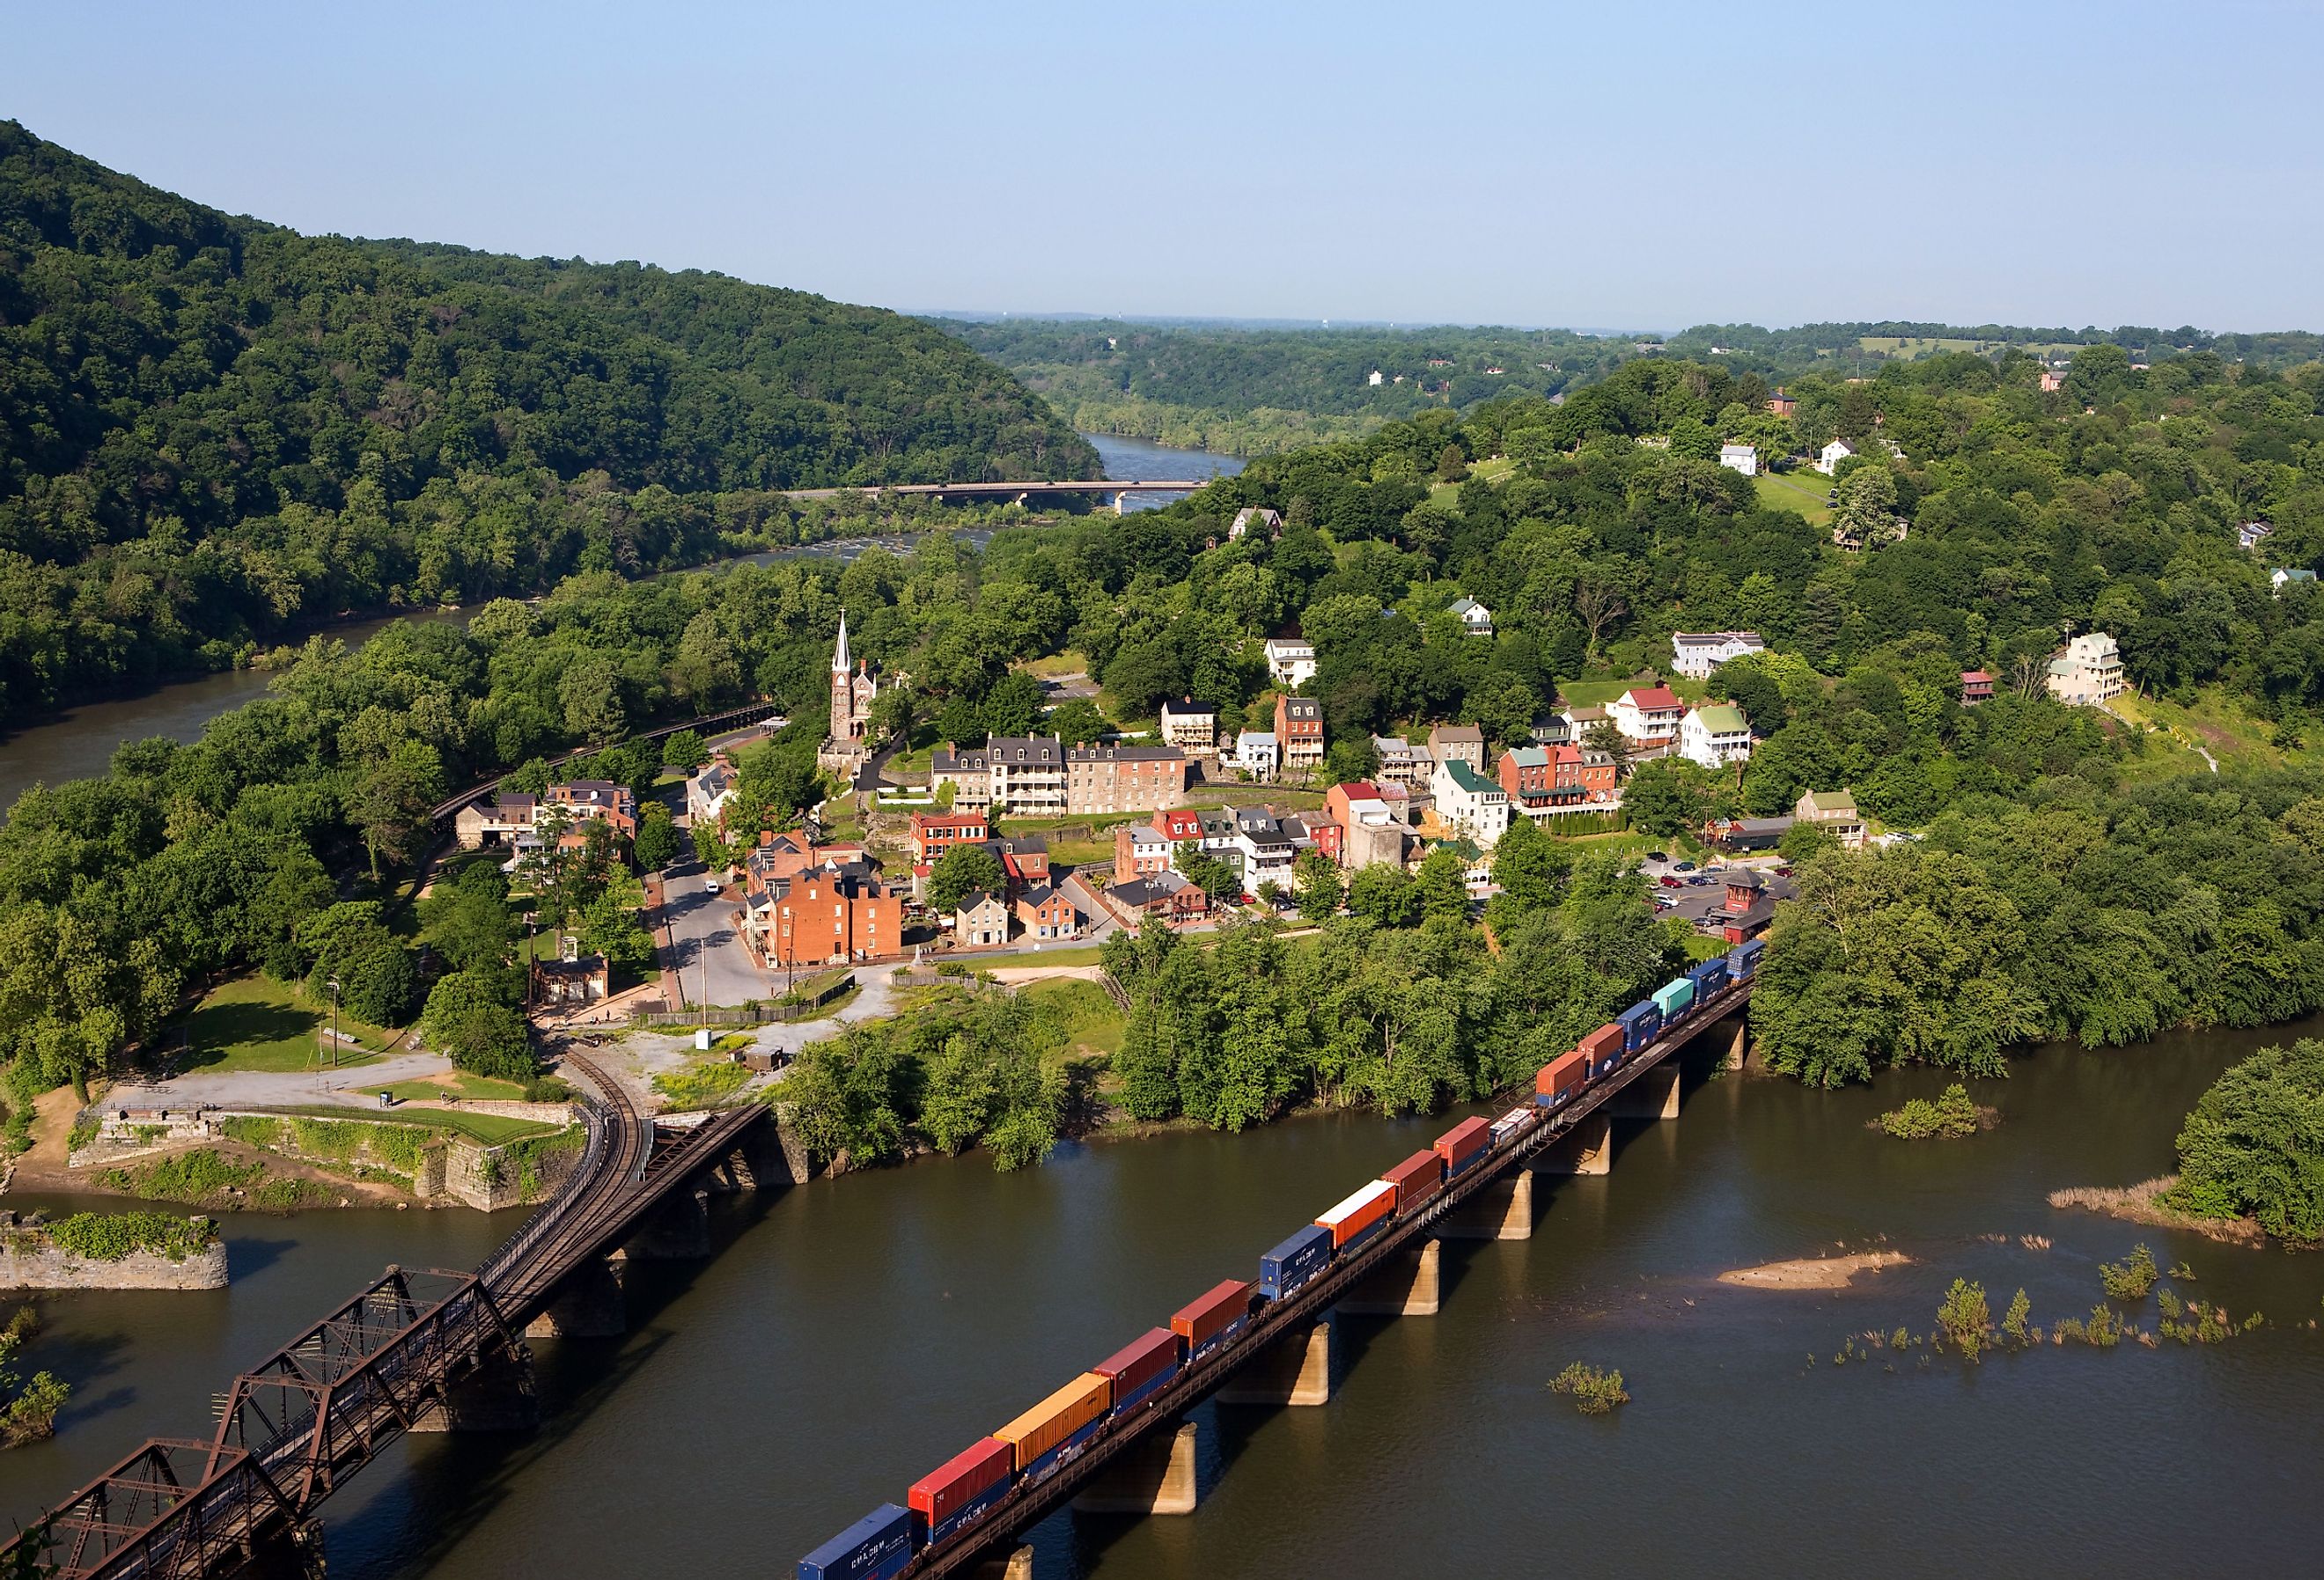 A train rolls across the Shenandoah River in an aerial view of the town of Harpers Ferry, West Virginia, which includes Harpers Ferry National Historical Park.